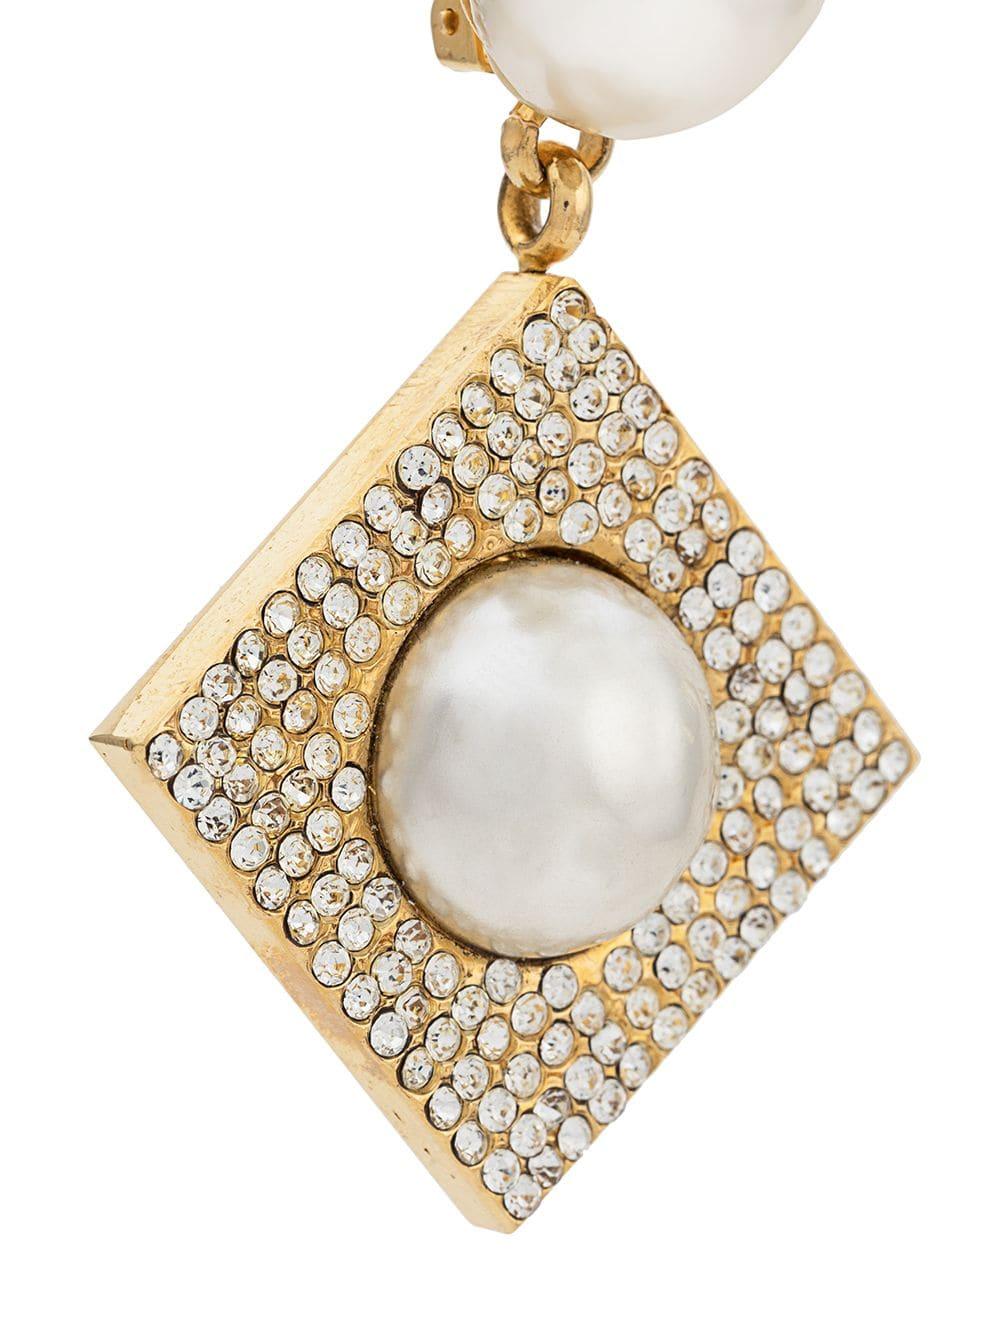 Add a little Parisian sophistication to your look with a pair of pre-owned, drop earrings from Céline, crafted from antique gold-toned metal hardware and designed for the optimum elegance with a geometric square-shaped design, faux-pearl and